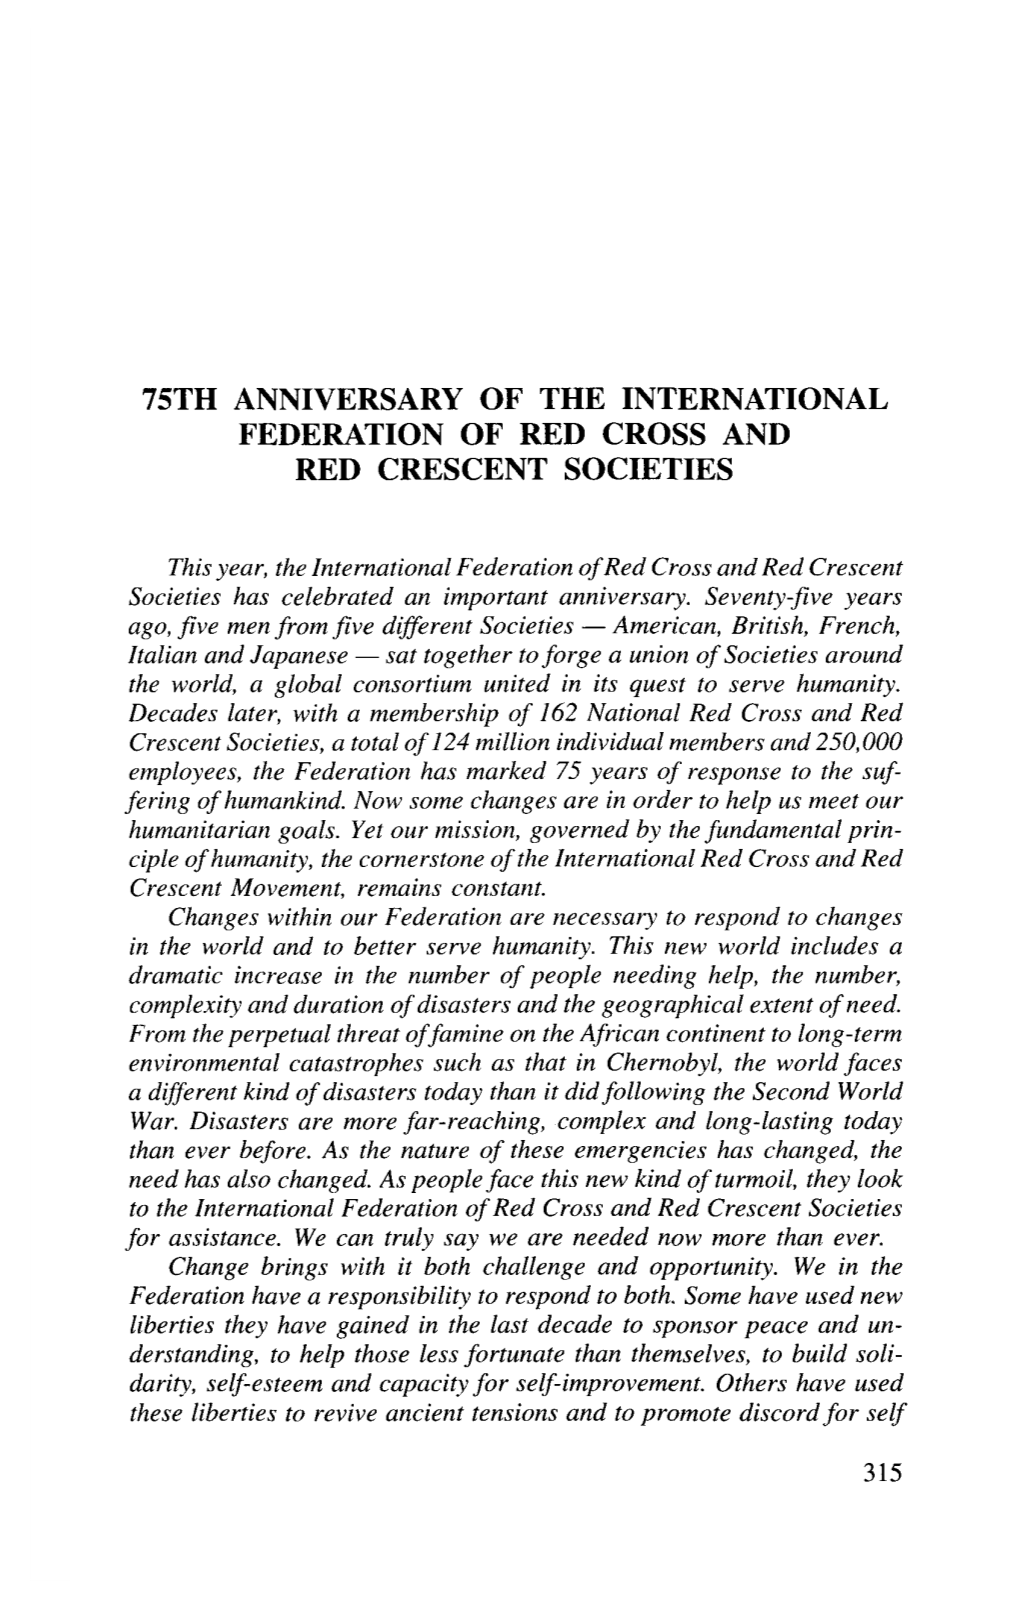 75Th Anniversary of the International Federation of Red Cross and Red Crescent Societies